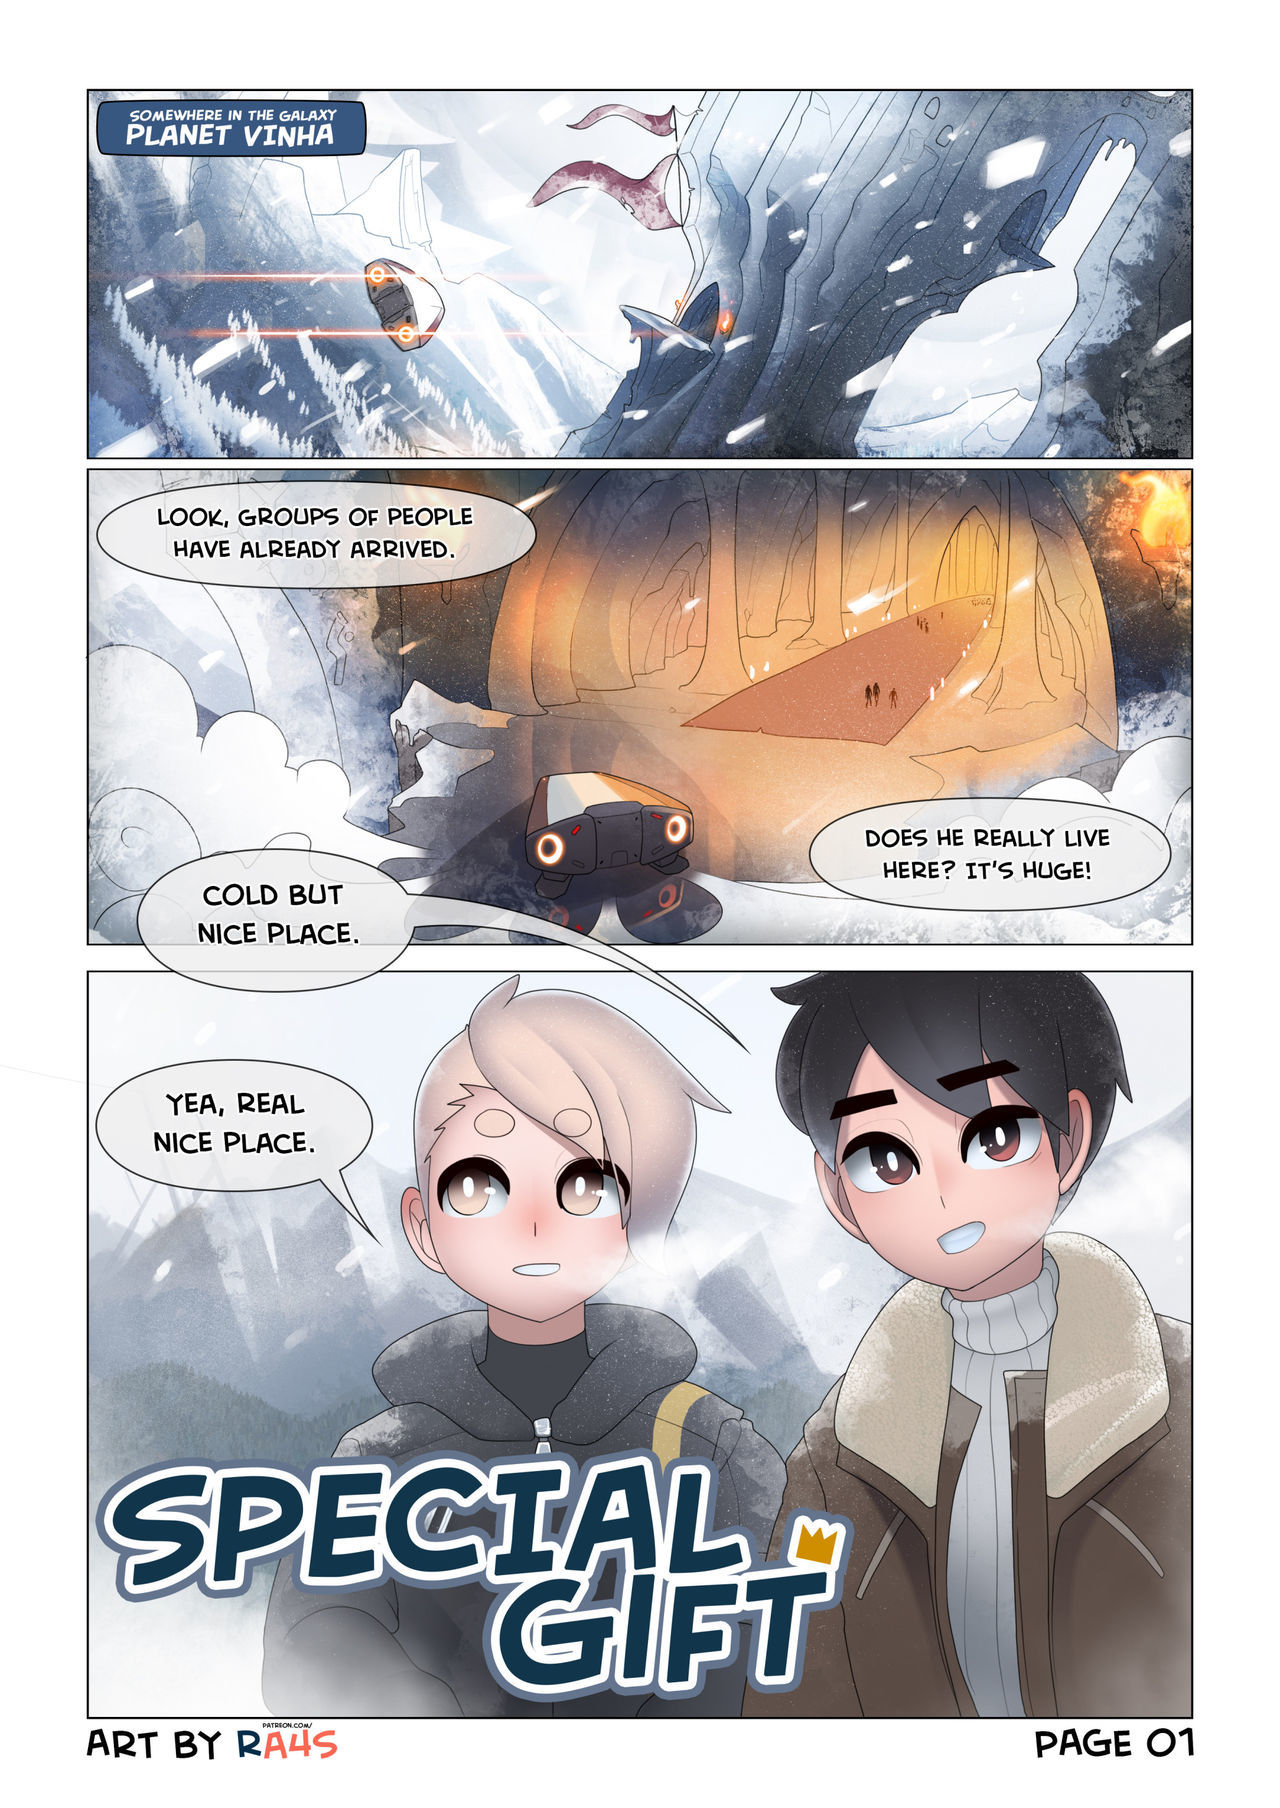 Special Gift by ra4s page 1